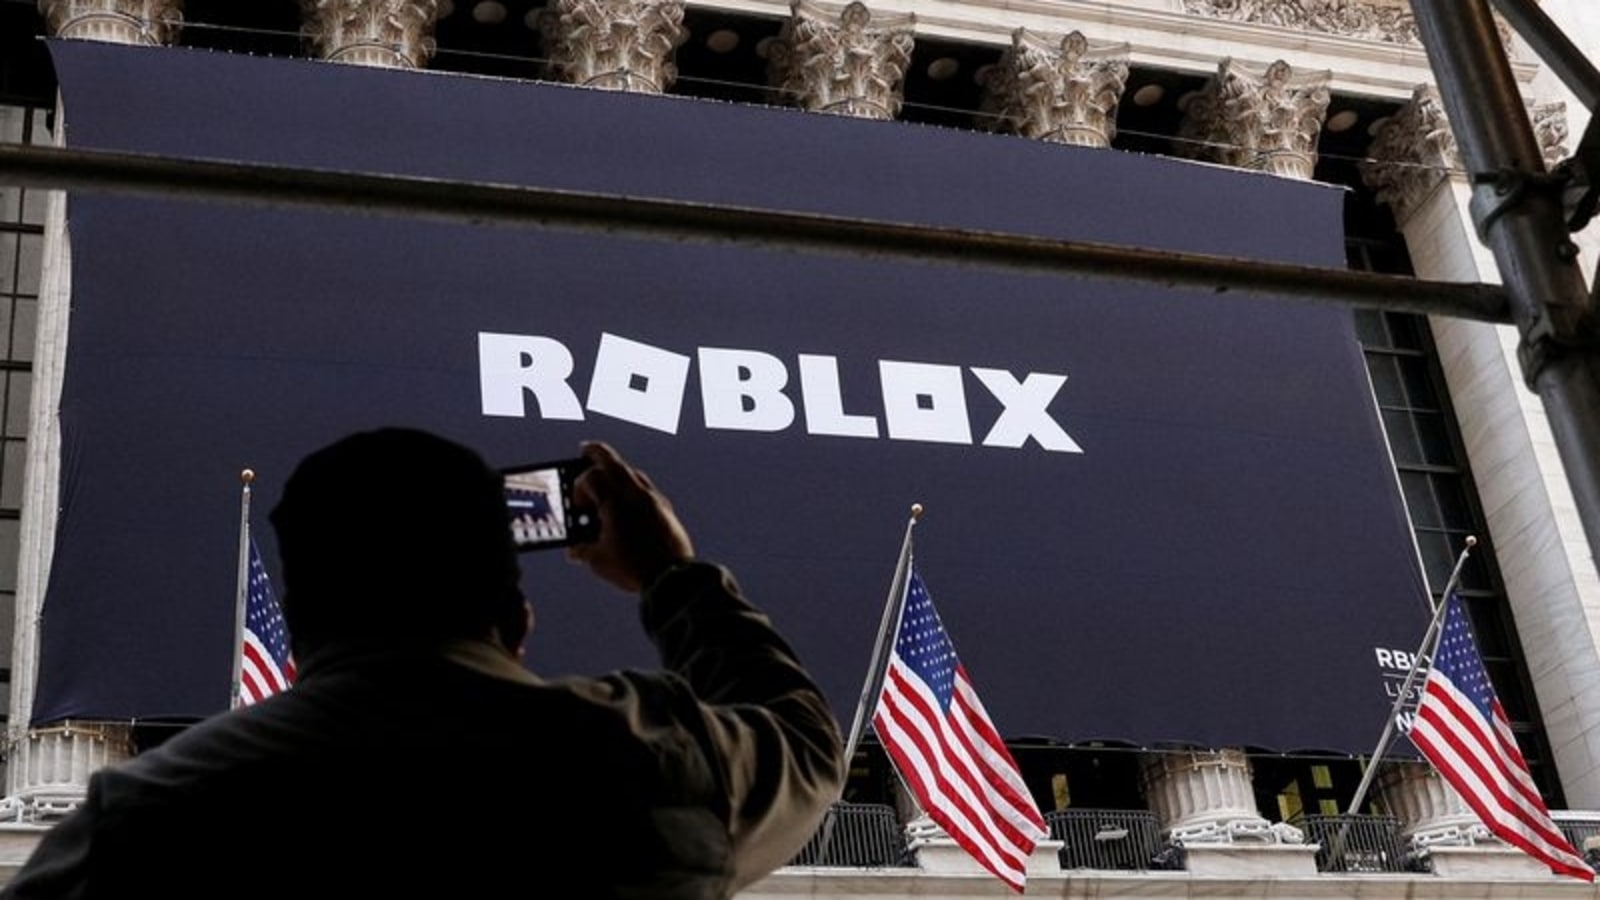 Roblox To Debut On PlayStation With New World Building AI Tools